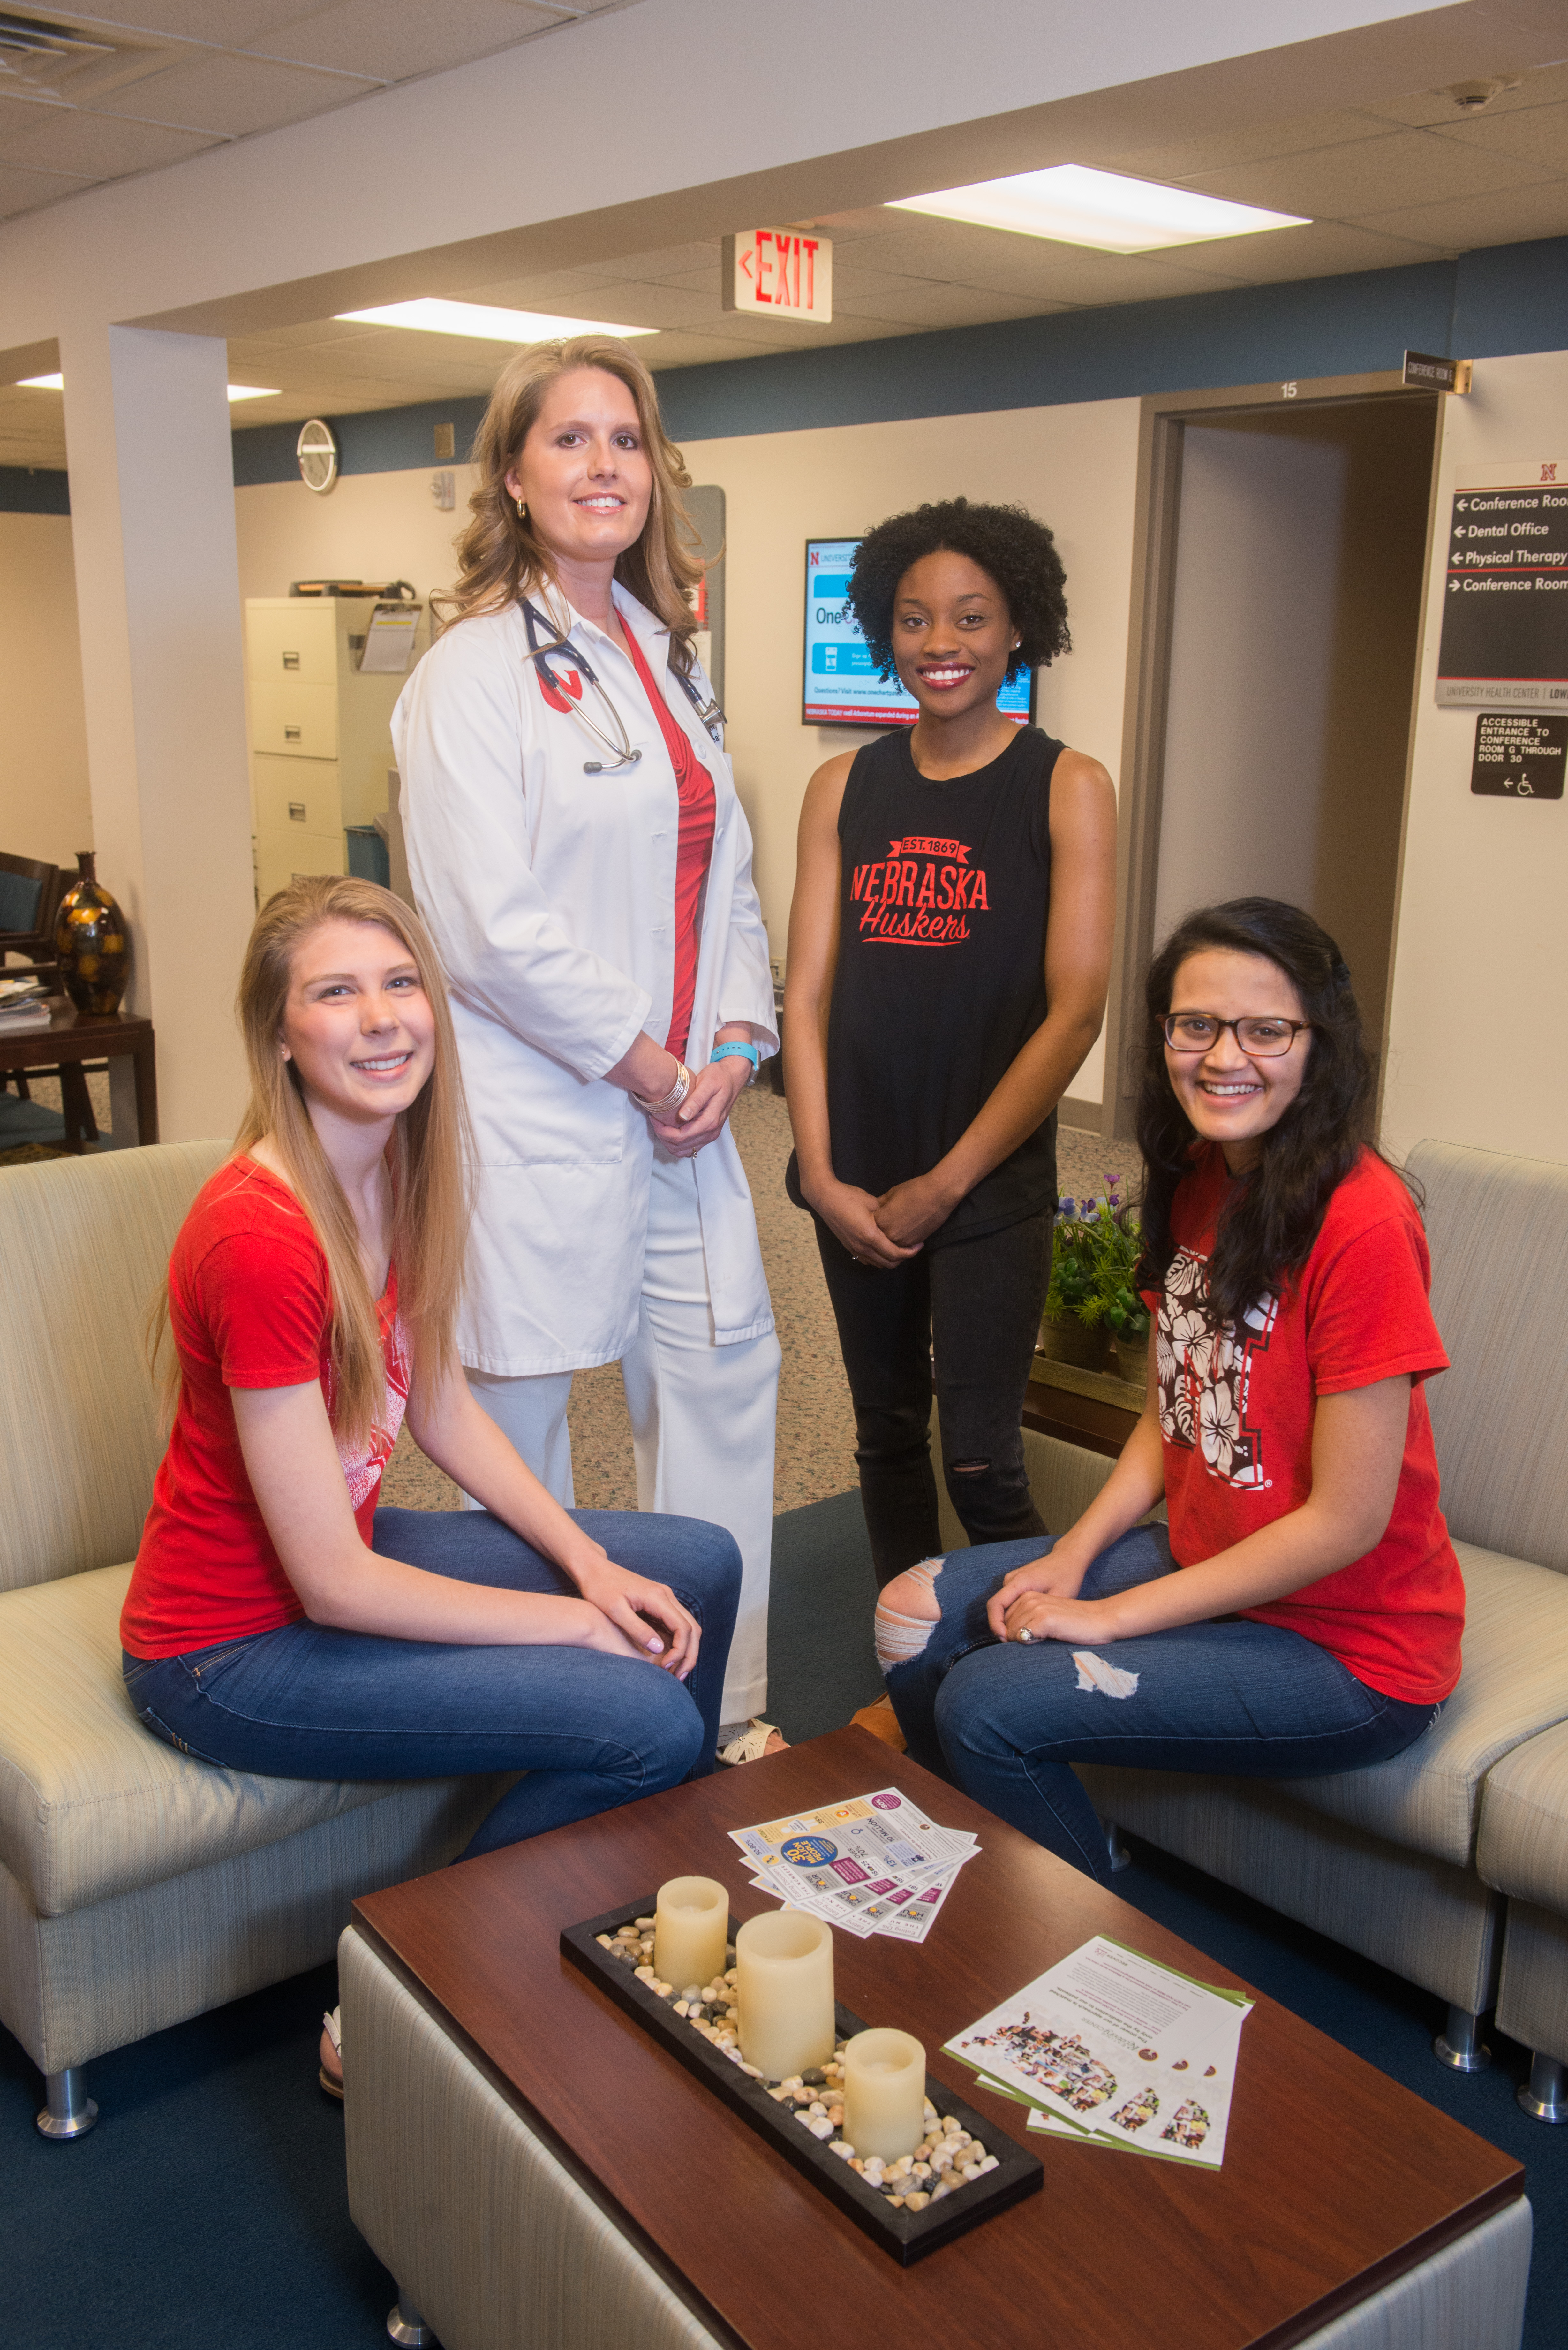 Students paying student fees receive many free benefits from the University Health Center.